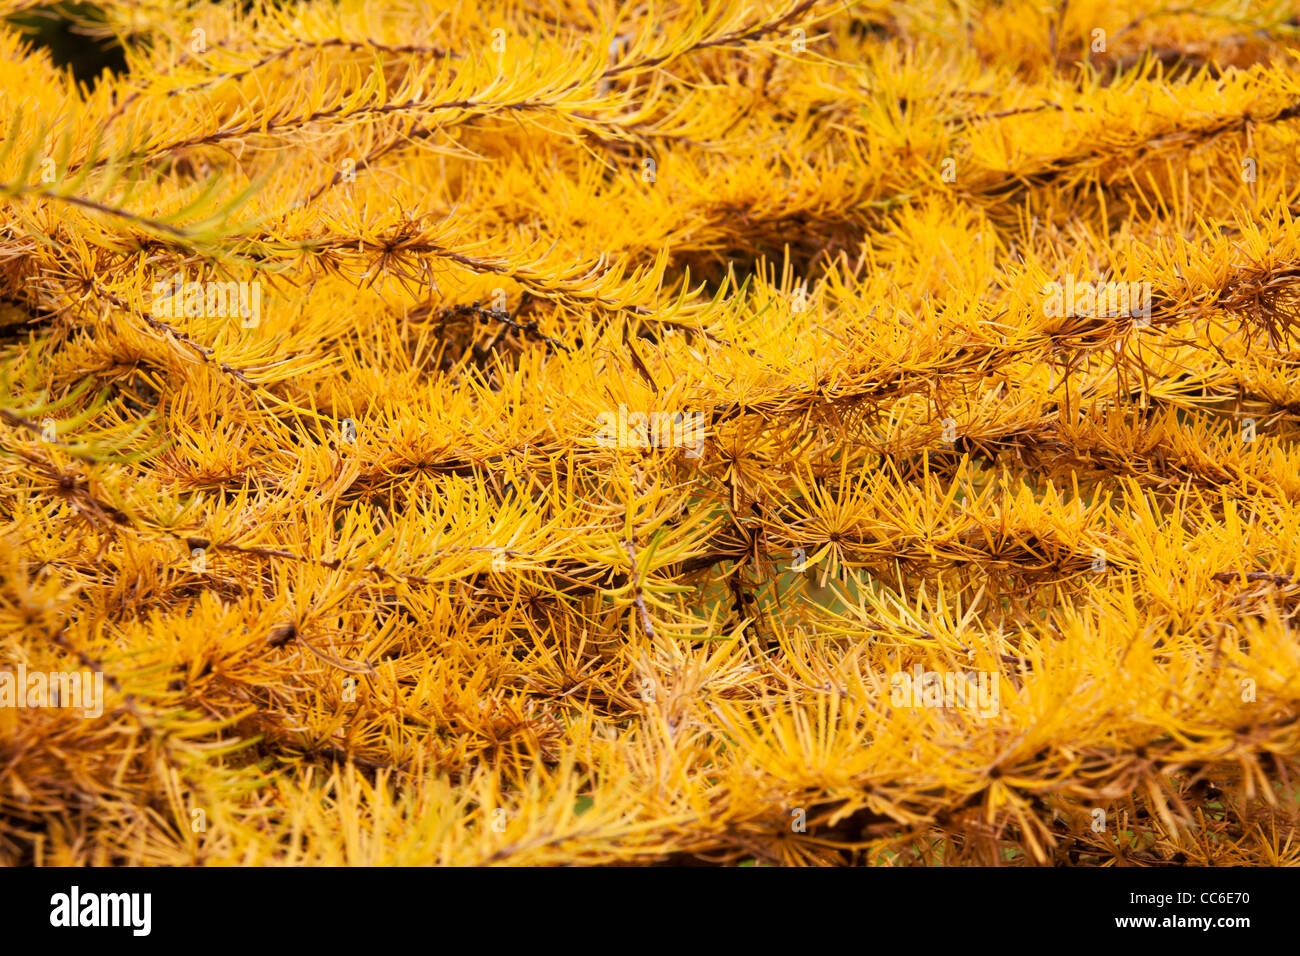 Golden leafs of Larix Gmelini Japonica a strange Asian conifer late in autumn Stock Photo